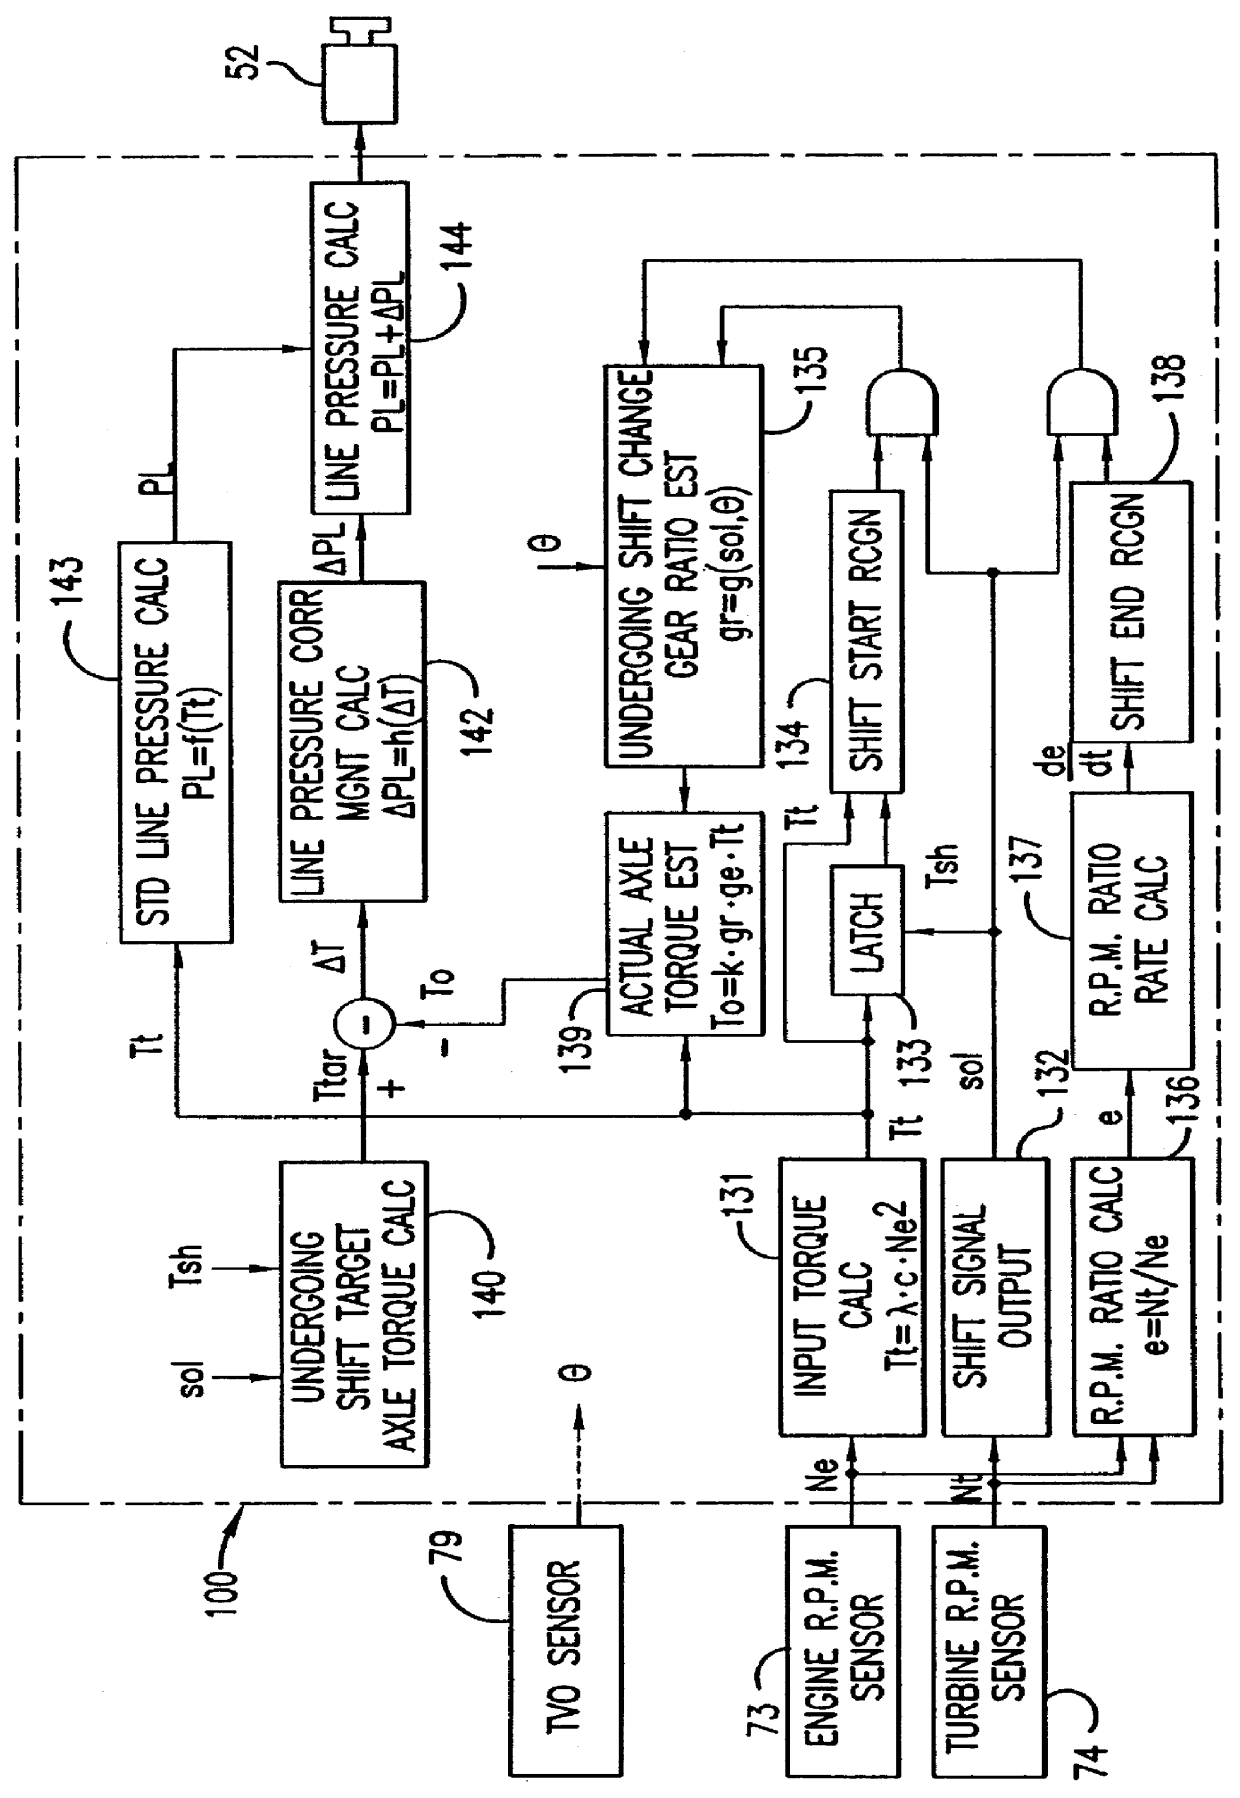 Driving force control system for a vehicle